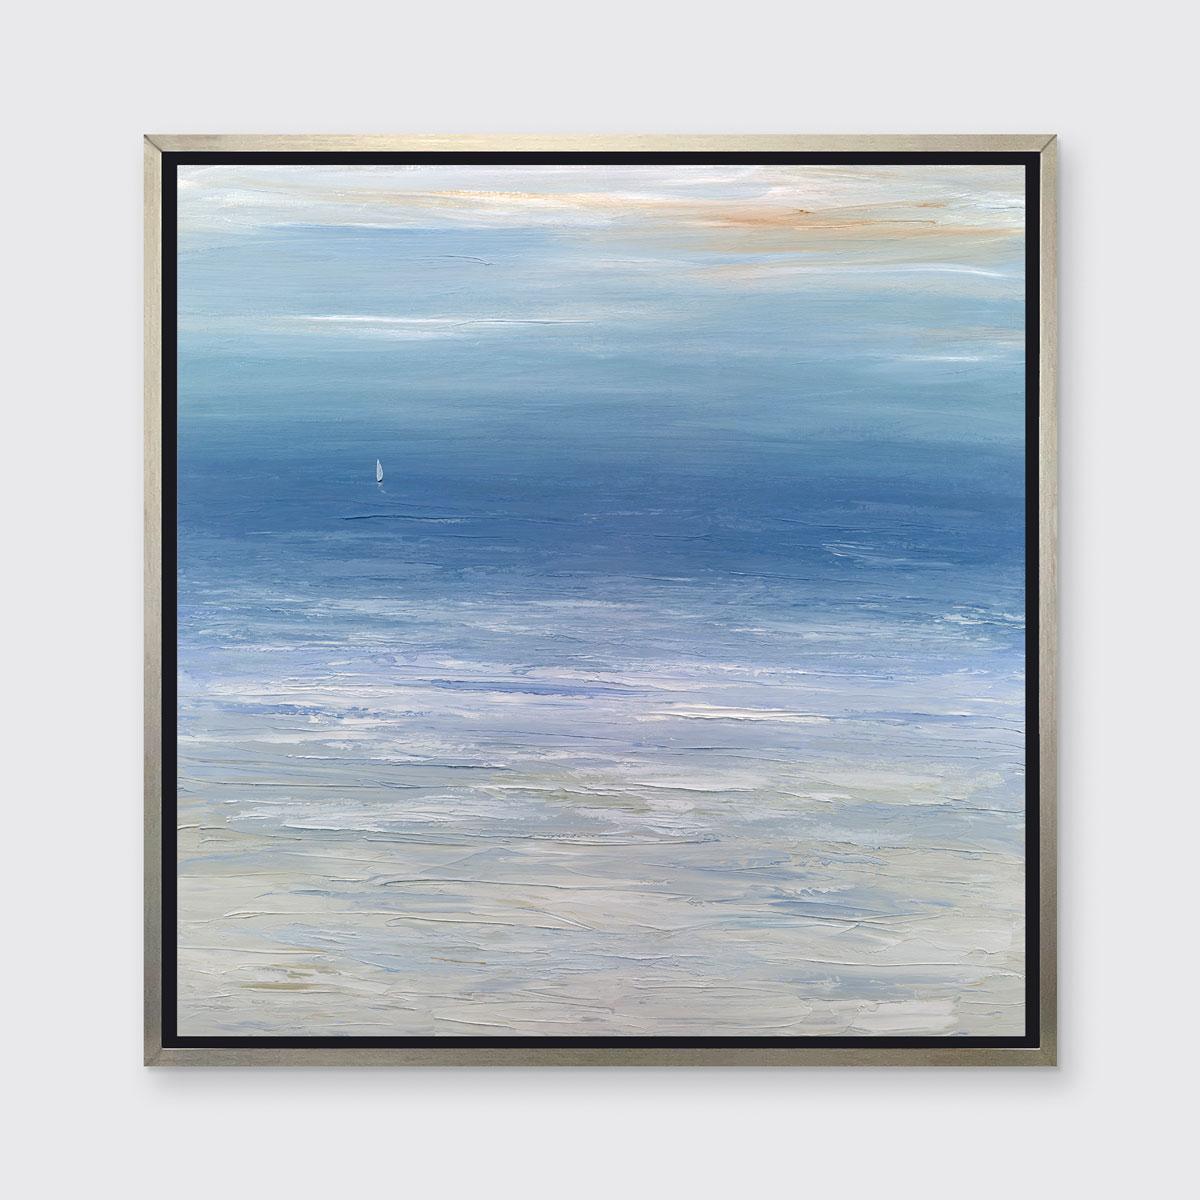 S. Cora Aldo Landscape Print - "Calm Waters II, " Framed Limited Edition Giclee Print, 40" x 40"